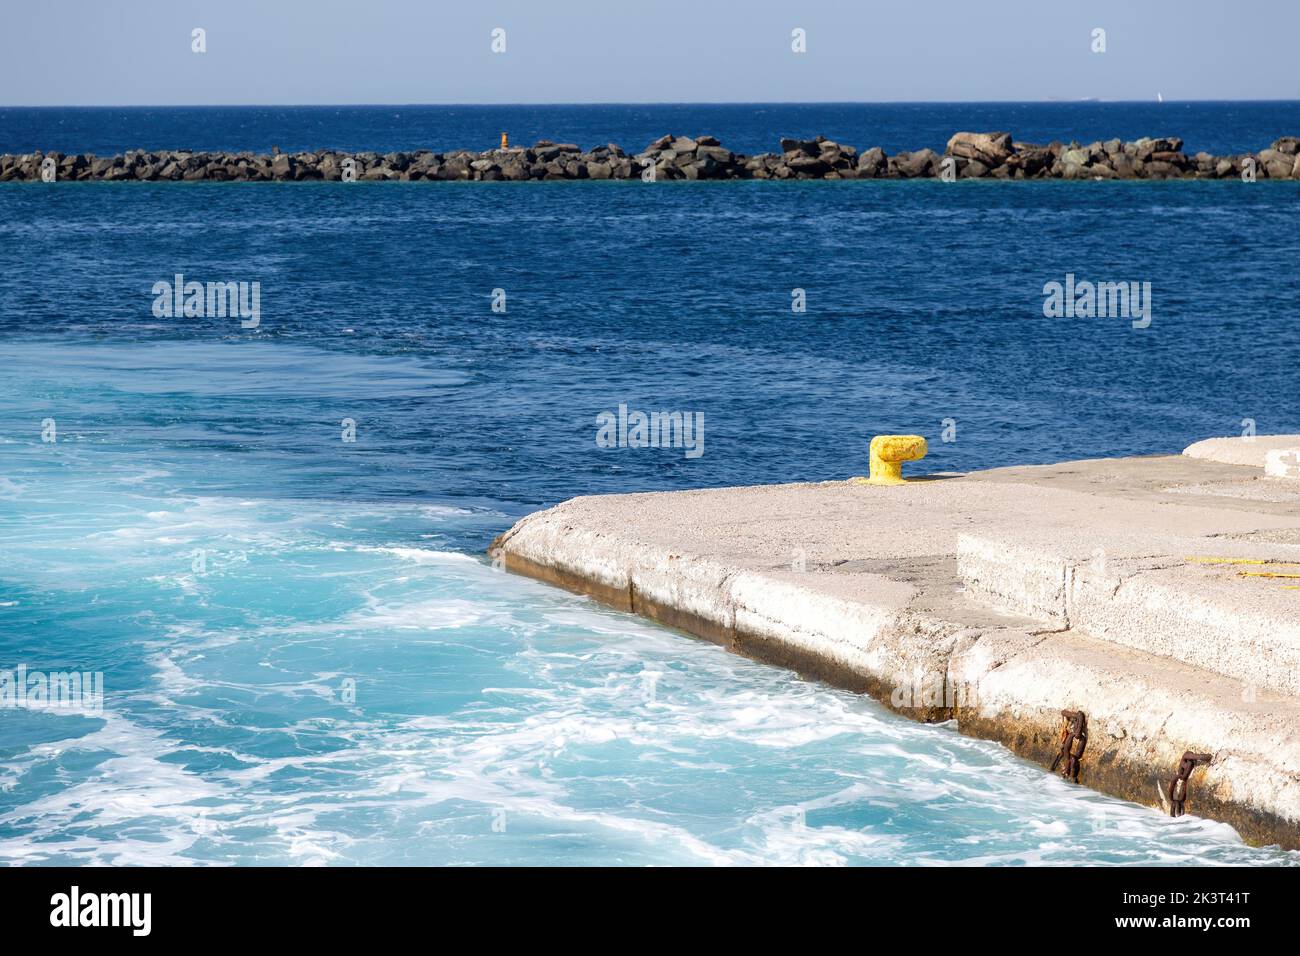 Greece, Naxos harbor destination Cyclades islands. View of corner of jetty and stone breakwater. Calm sea with foam at dock, sunny day, blue sky backg Stock Photo